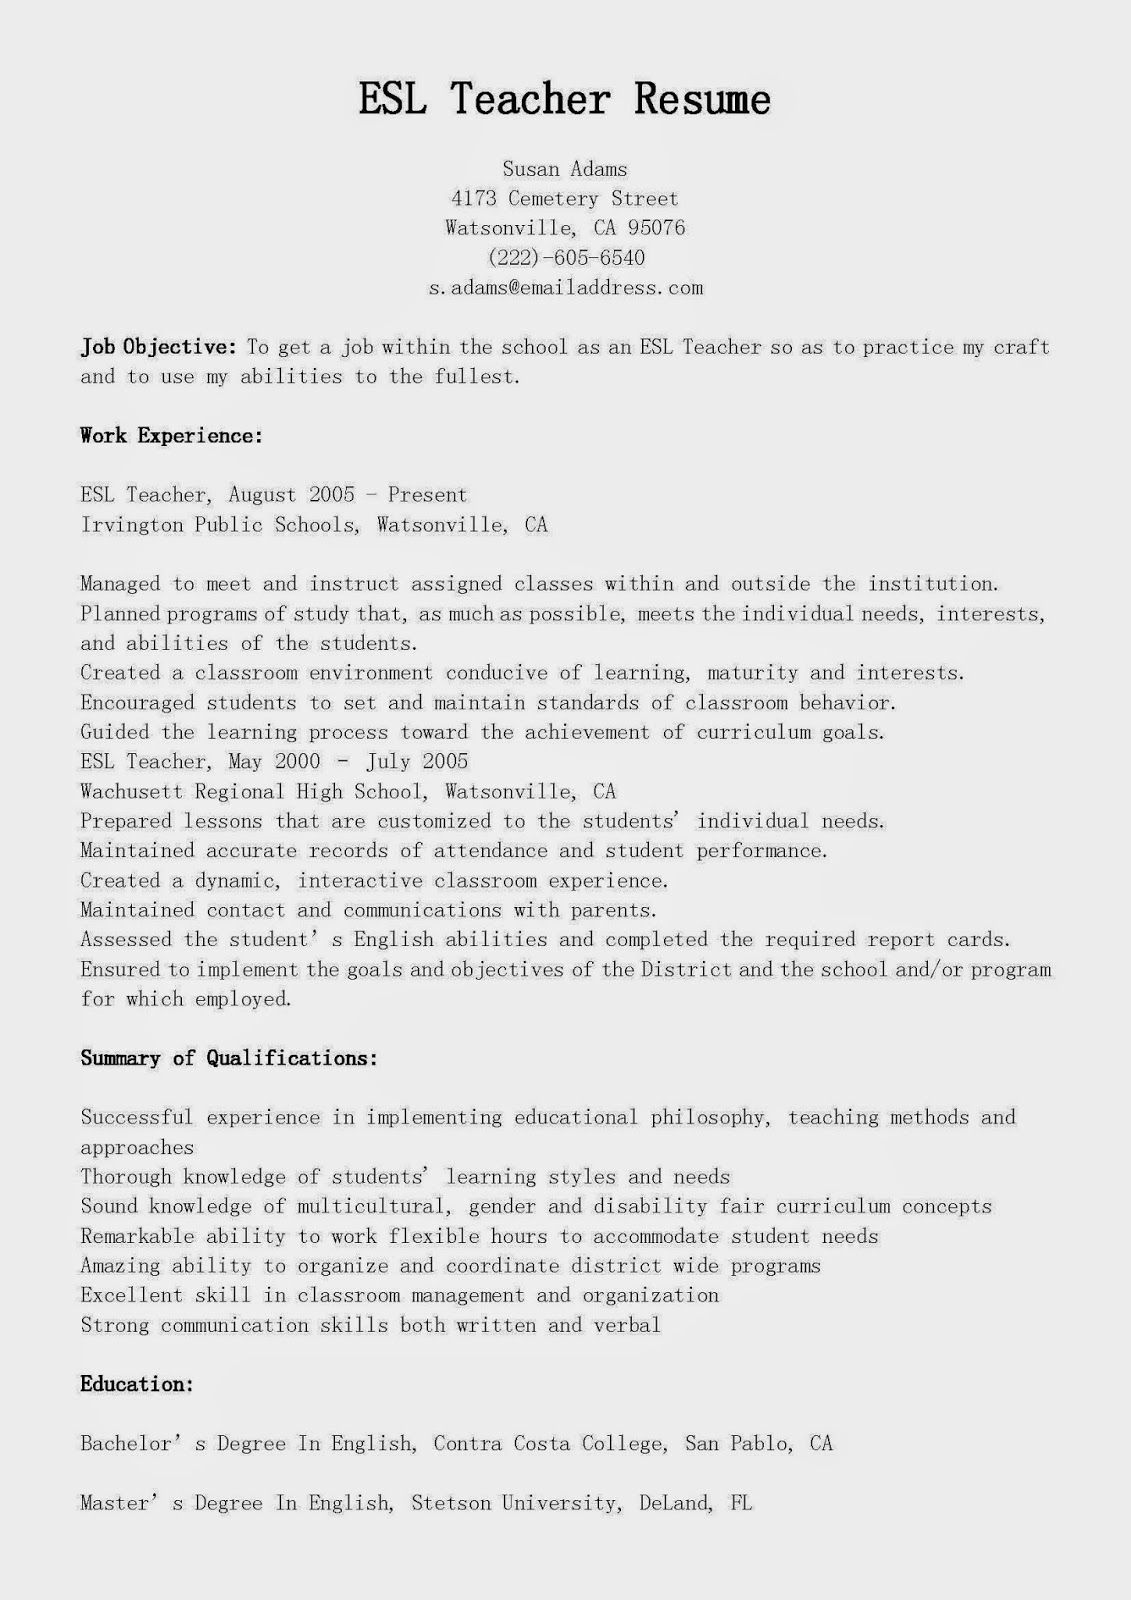 Philosphy education college cover letter resume